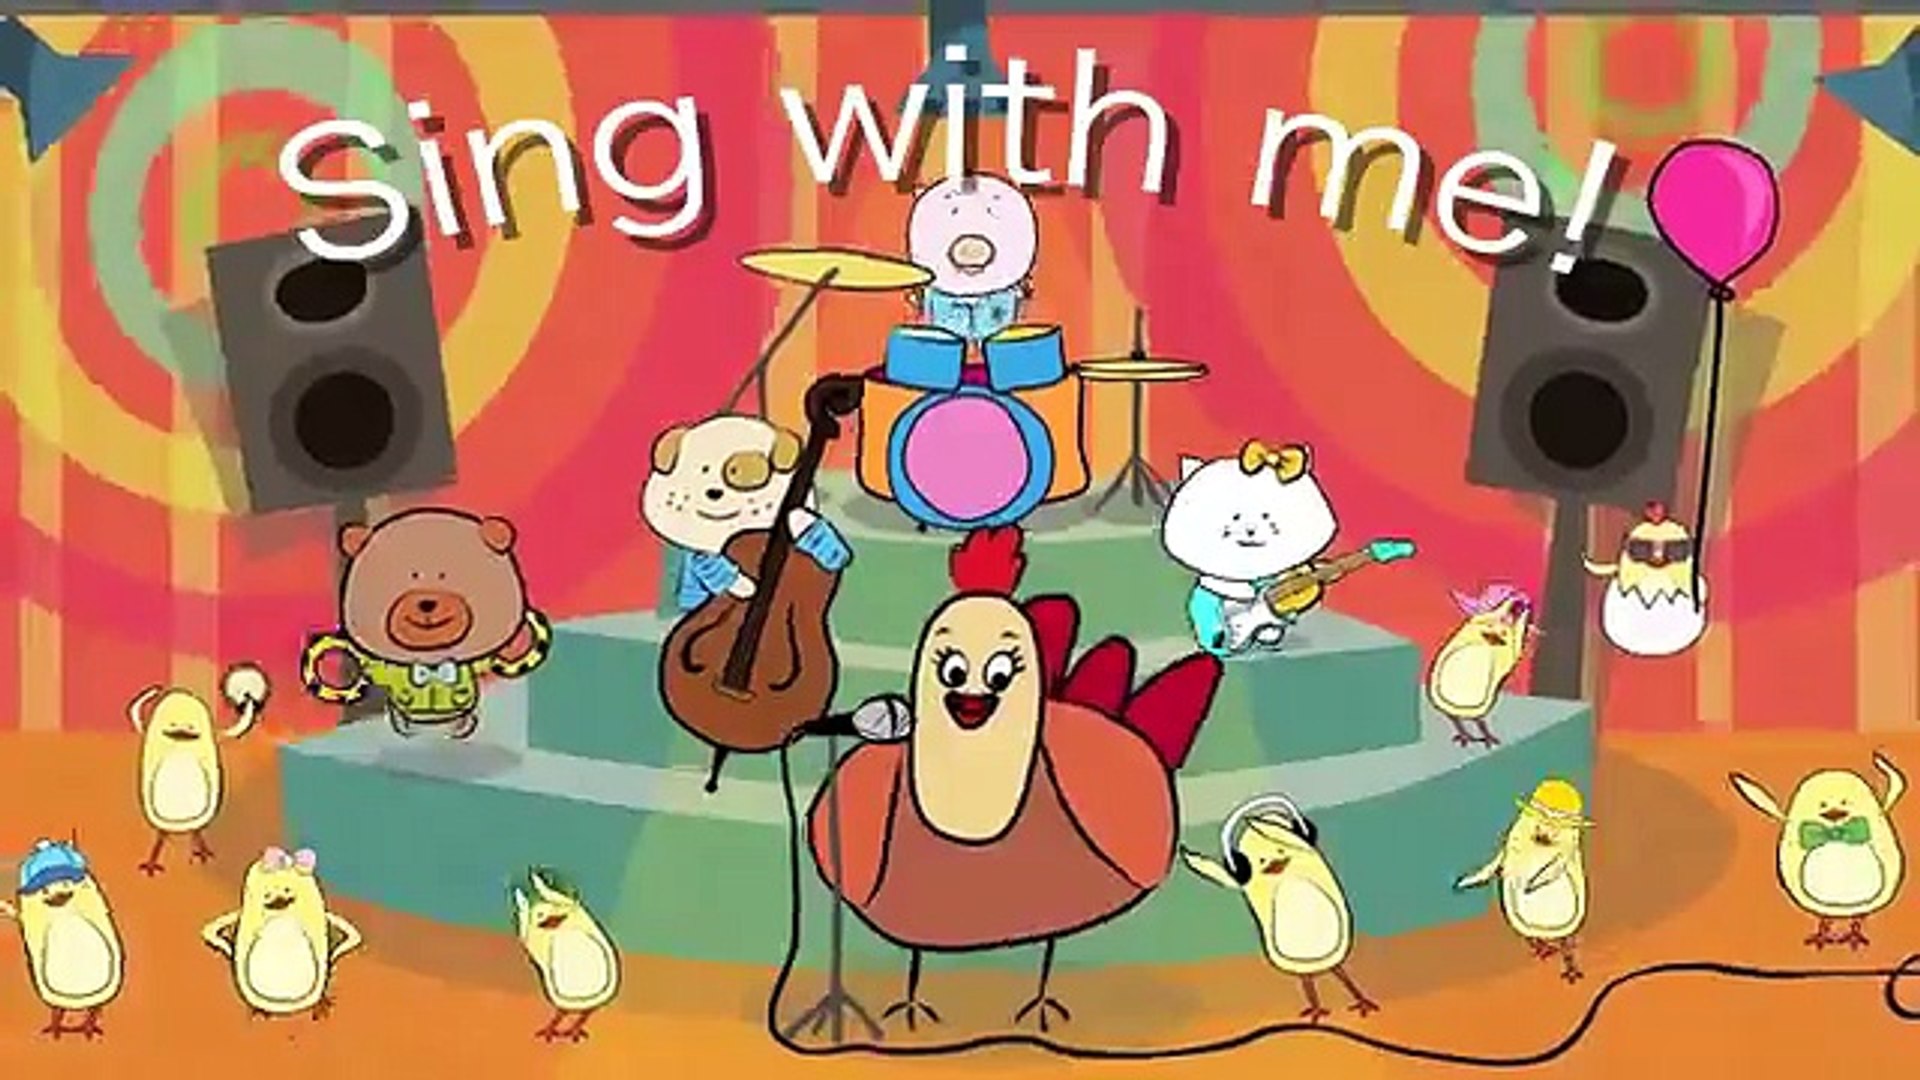 Action Songs for kids | The Singing Walrus - Dailymotion Video